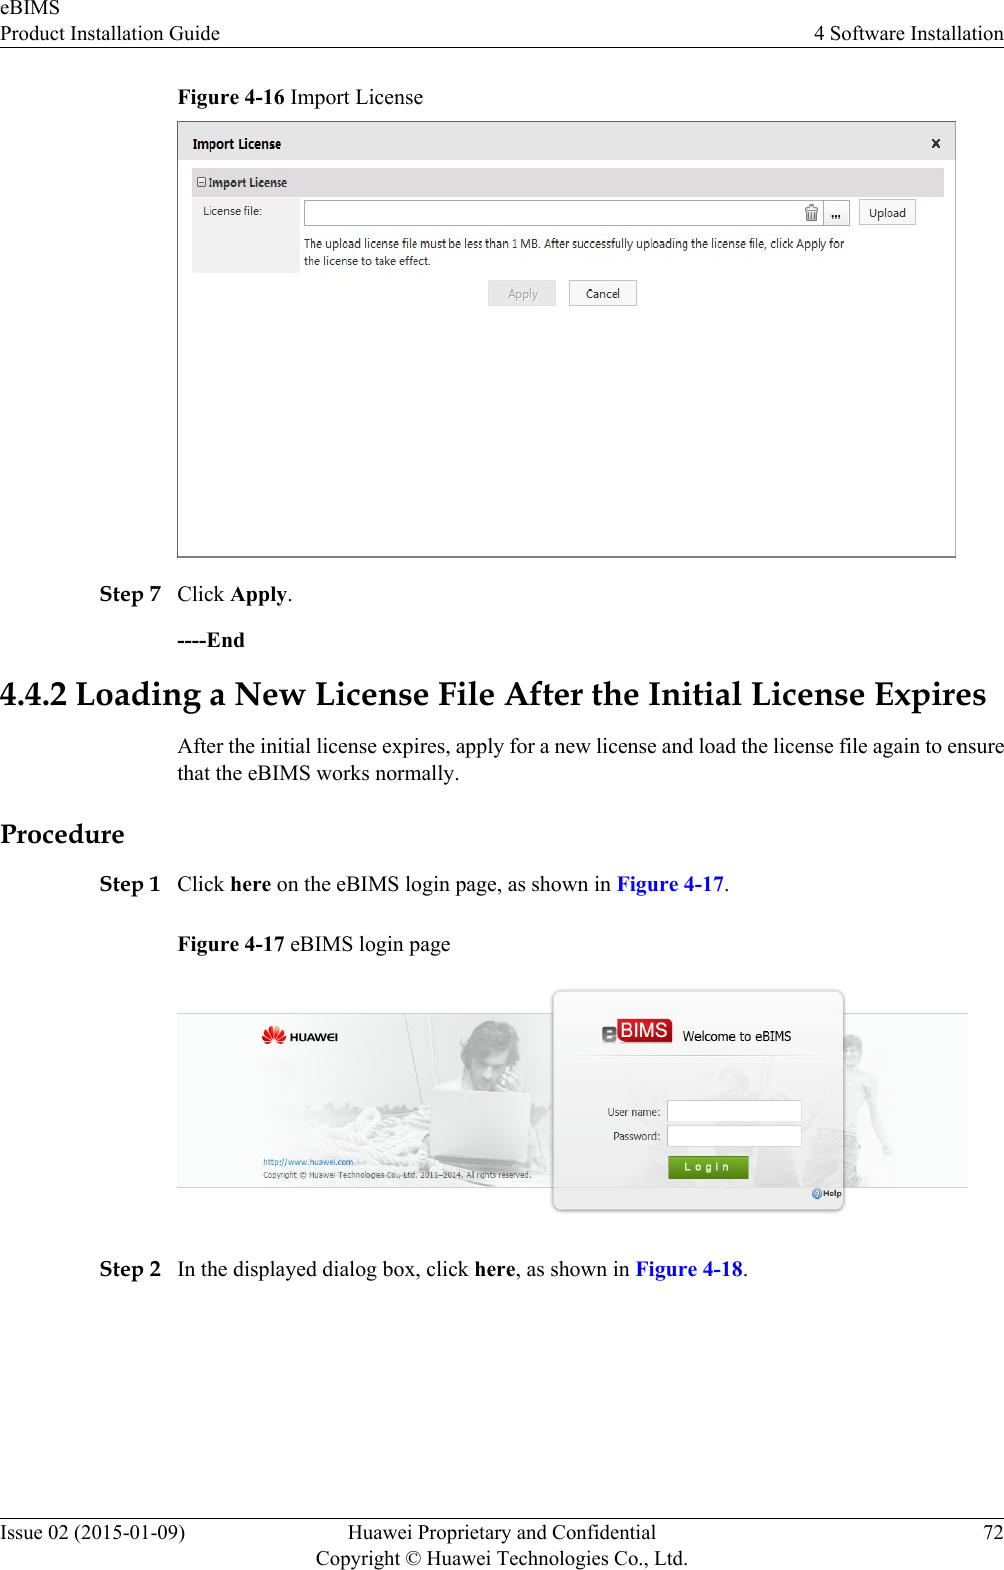 Figure 4-16 Import LicenseStep 7 Click Apply.----End4.4.2 Loading a New License File After the Initial License ExpiresAfter the initial license expires, apply for a new license and load the license file again to ensurethat the eBIMS works normally.ProcedureStep 1 Click here on the eBIMS login page, as shown in Figure 4-17.Figure 4-17 eBIMS login pageStep 2 In the displayed dialog box, click here, as shown in Figure 4-18.eBIMSProduct Installation Guide 4 Software InstallationIssue 02 (2015-01-09) Huawei Proprietary and ConfidentialCopyright © Huawei Technologies Co., Ltd.72